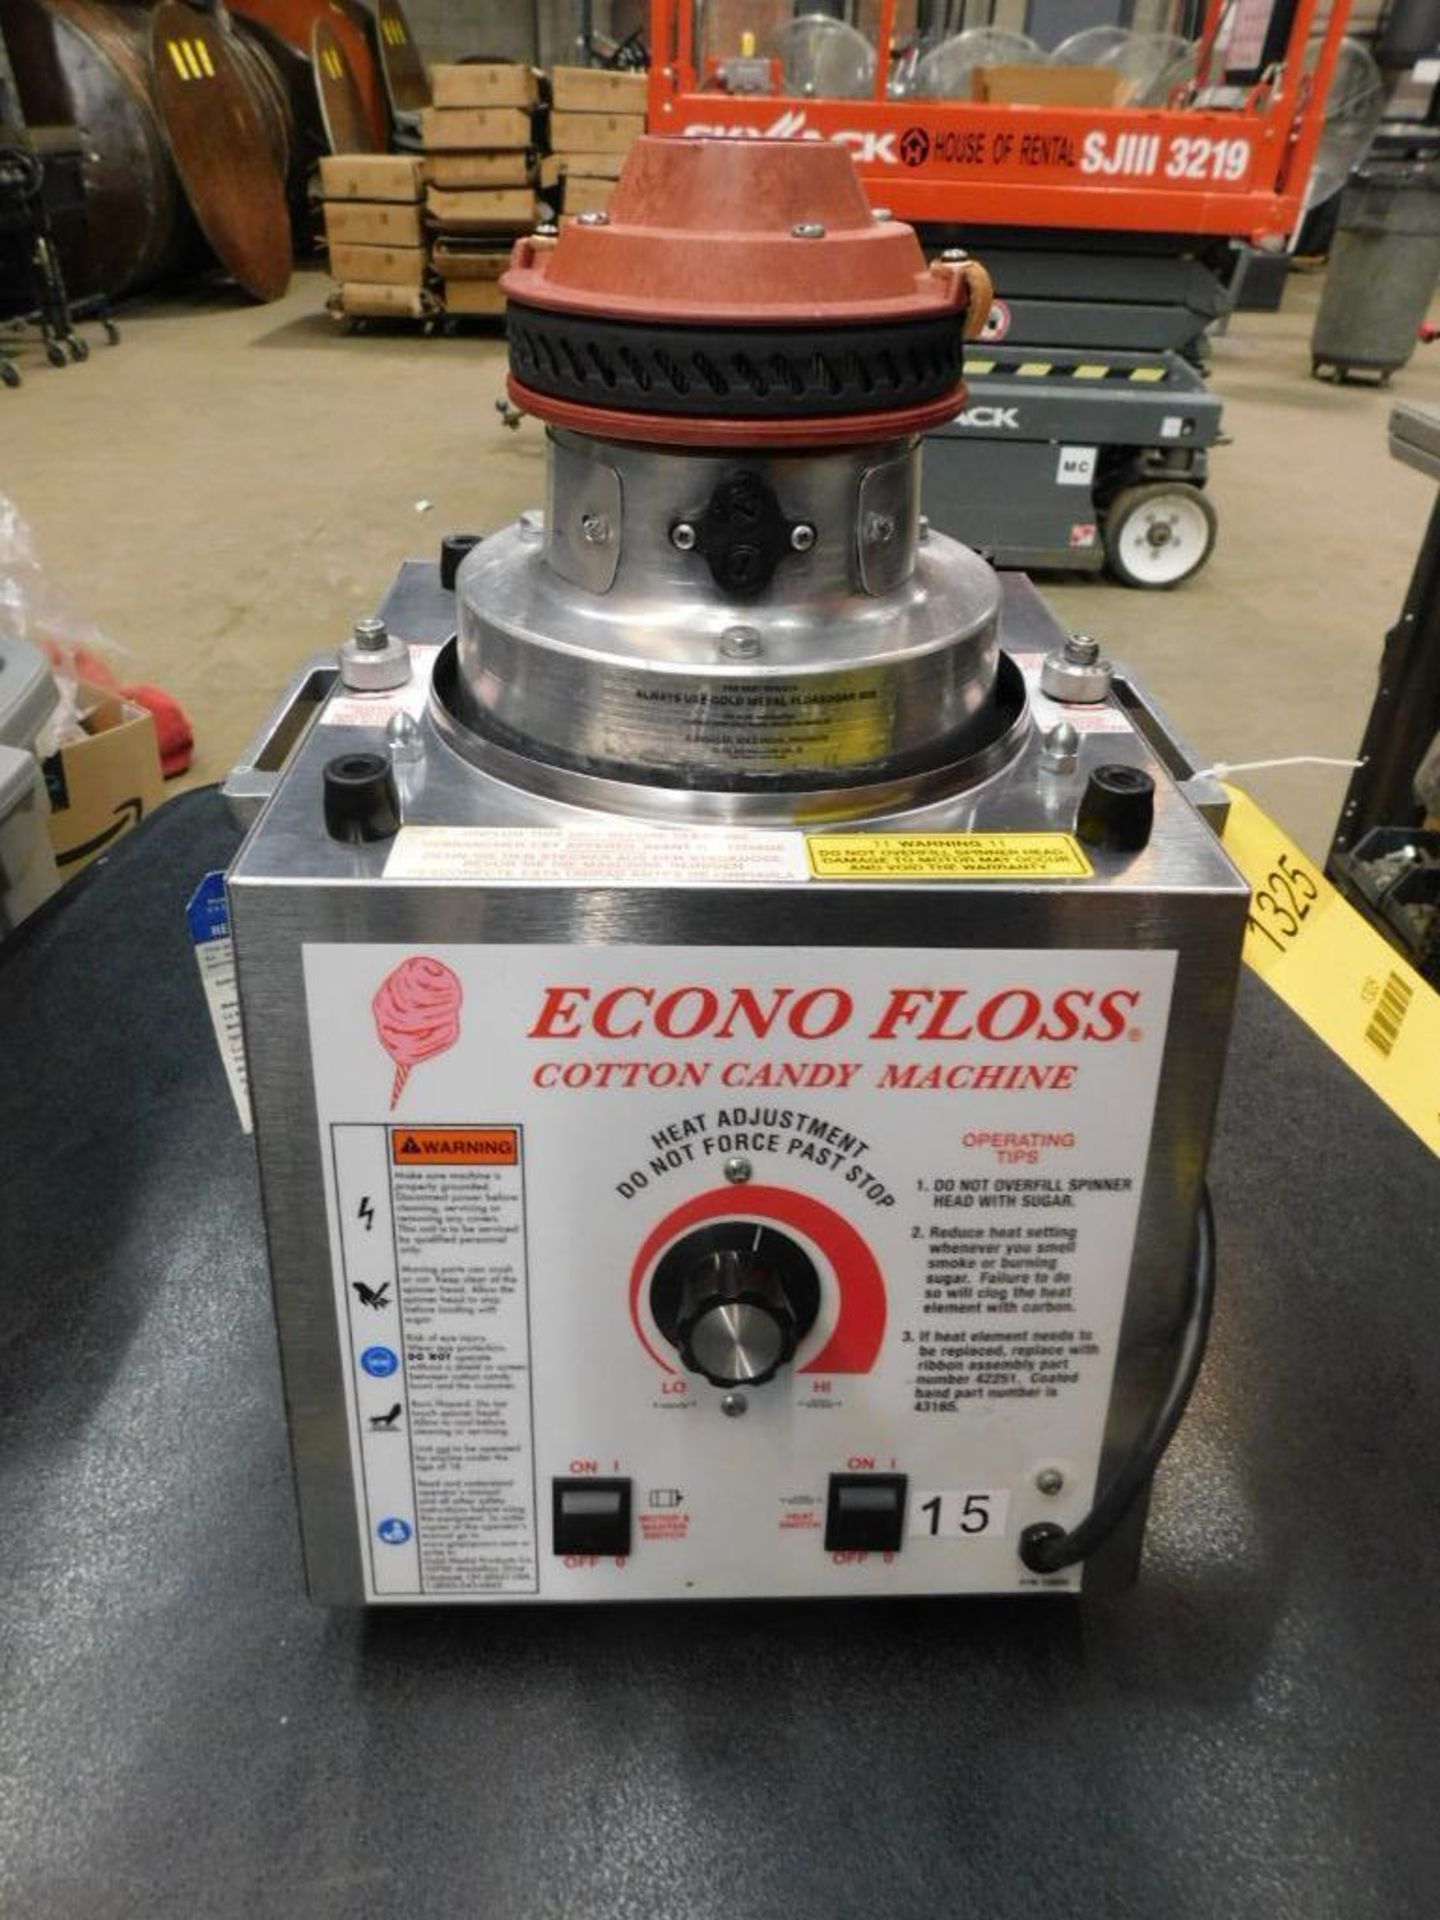 Gold Metal Econo Floss Cotton Candy Machine, Model 3017SS (LOCATION: 1766 Waukegan Rd., Glenview, IL